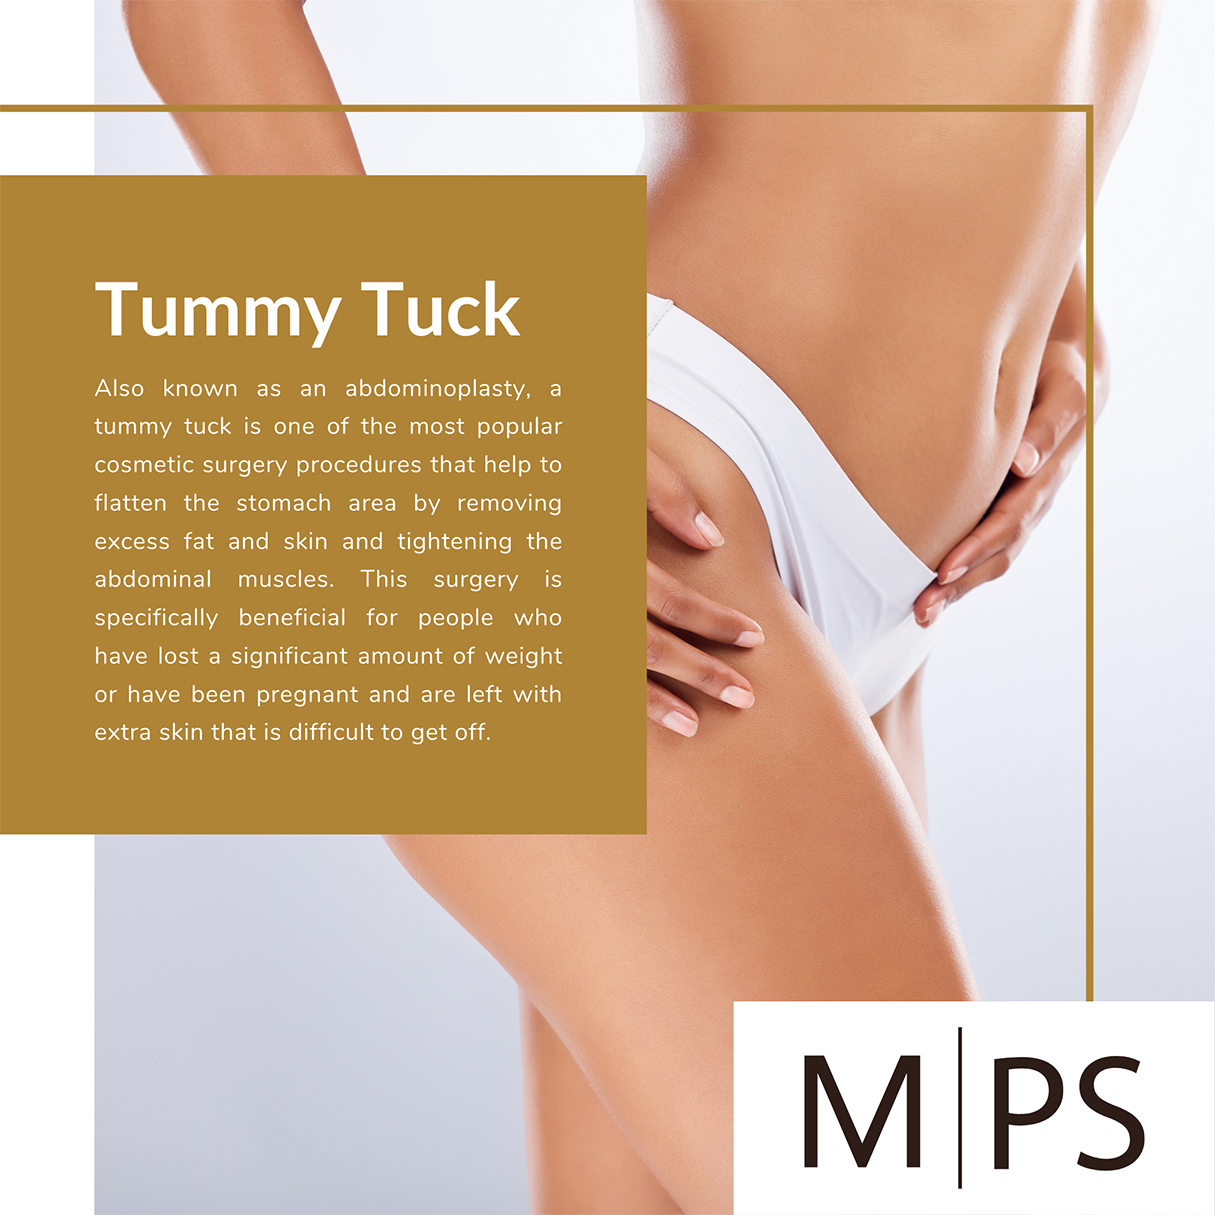 Tummy Tuck Recovery Guide